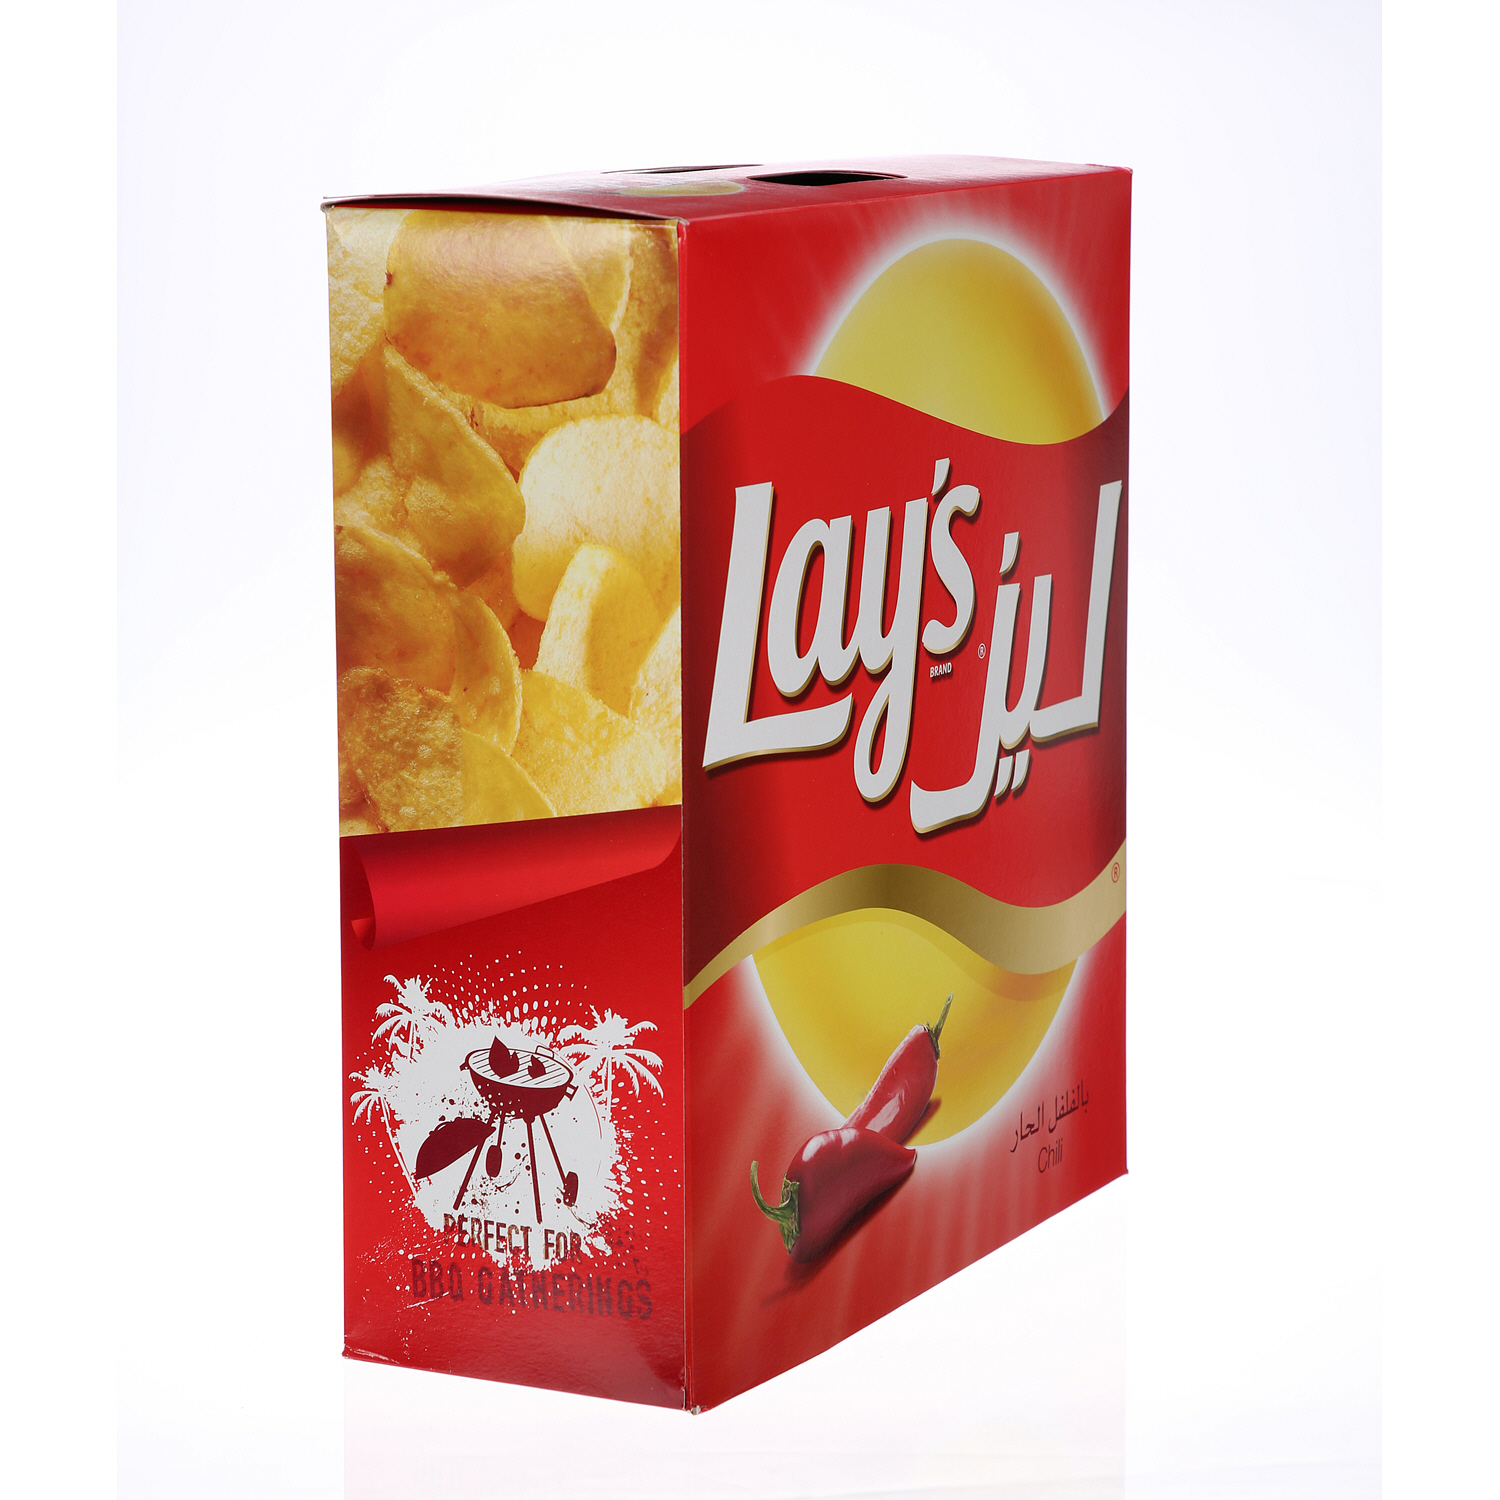 Lay's Chips Chilli 25gm × 14'S